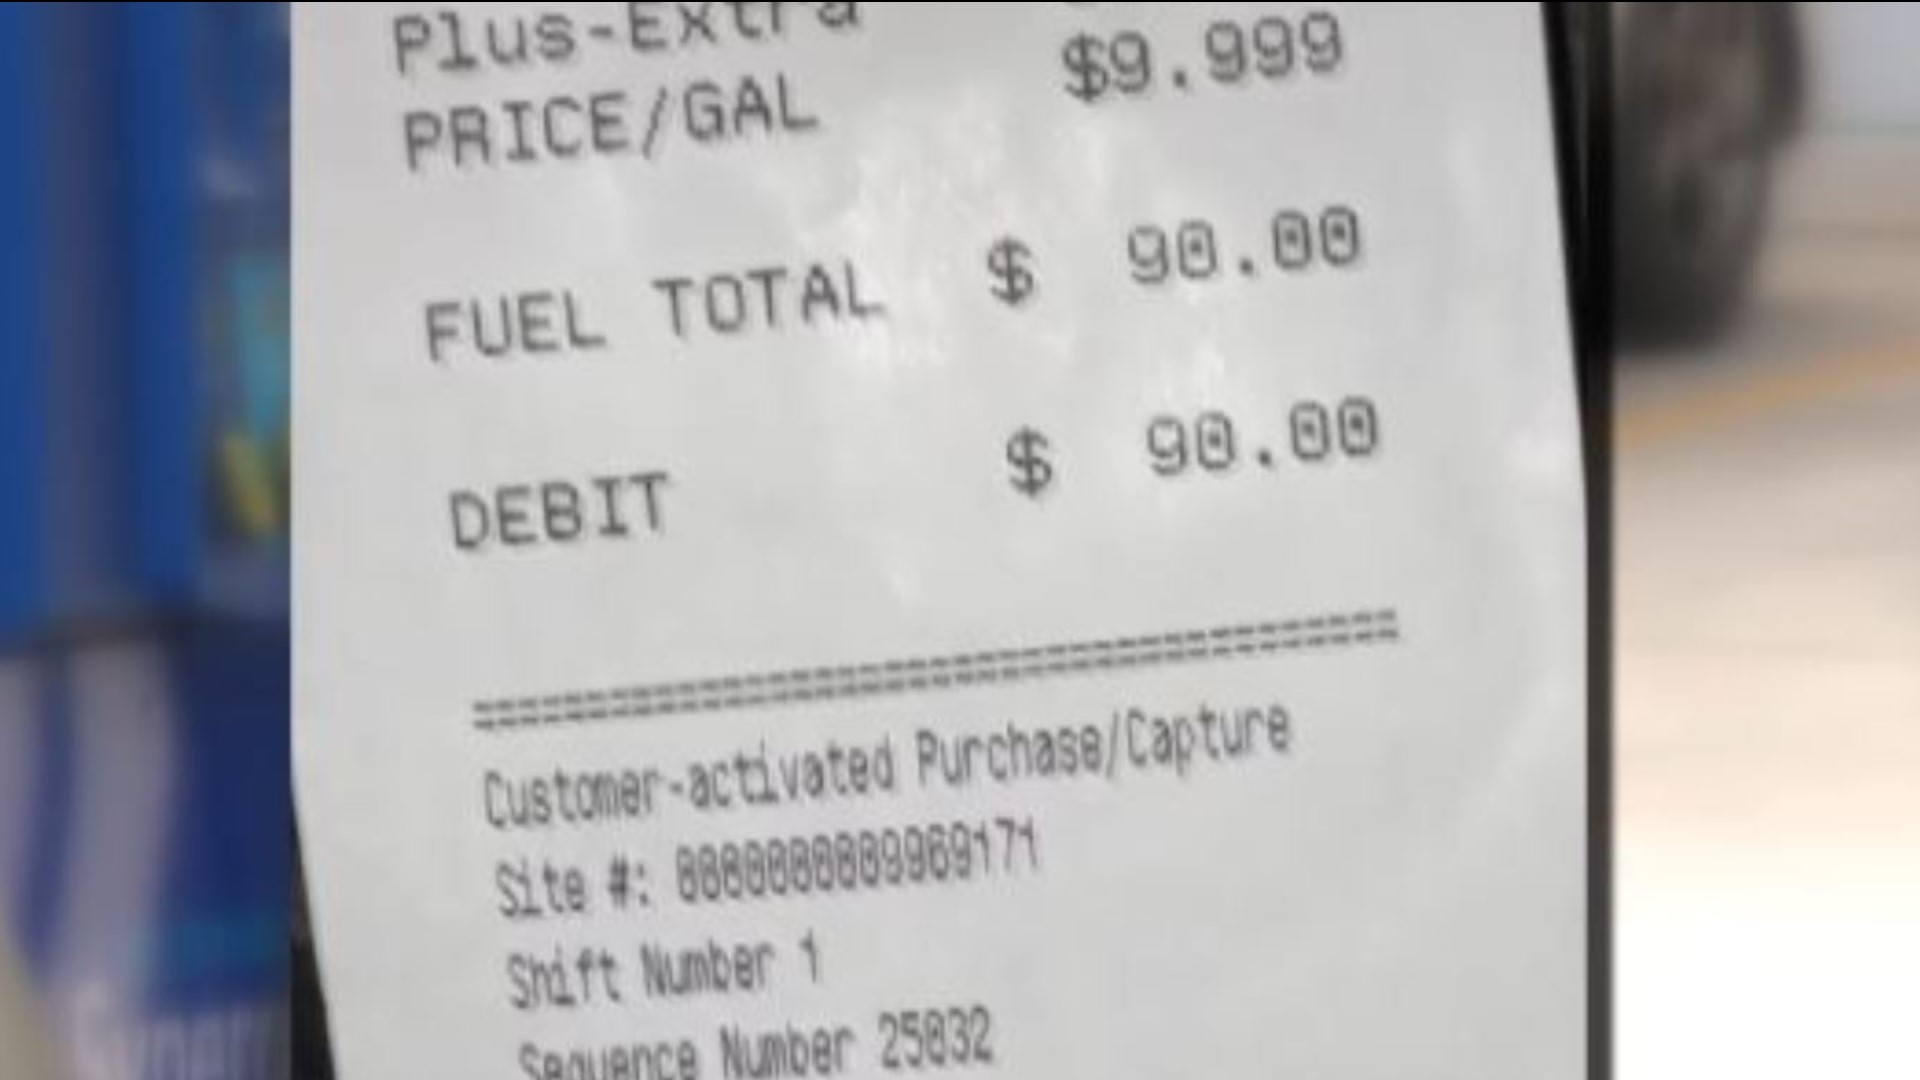 Many are accusing the north Charlotte gas station of price gouging, but the owner says it is a misunderstanding.